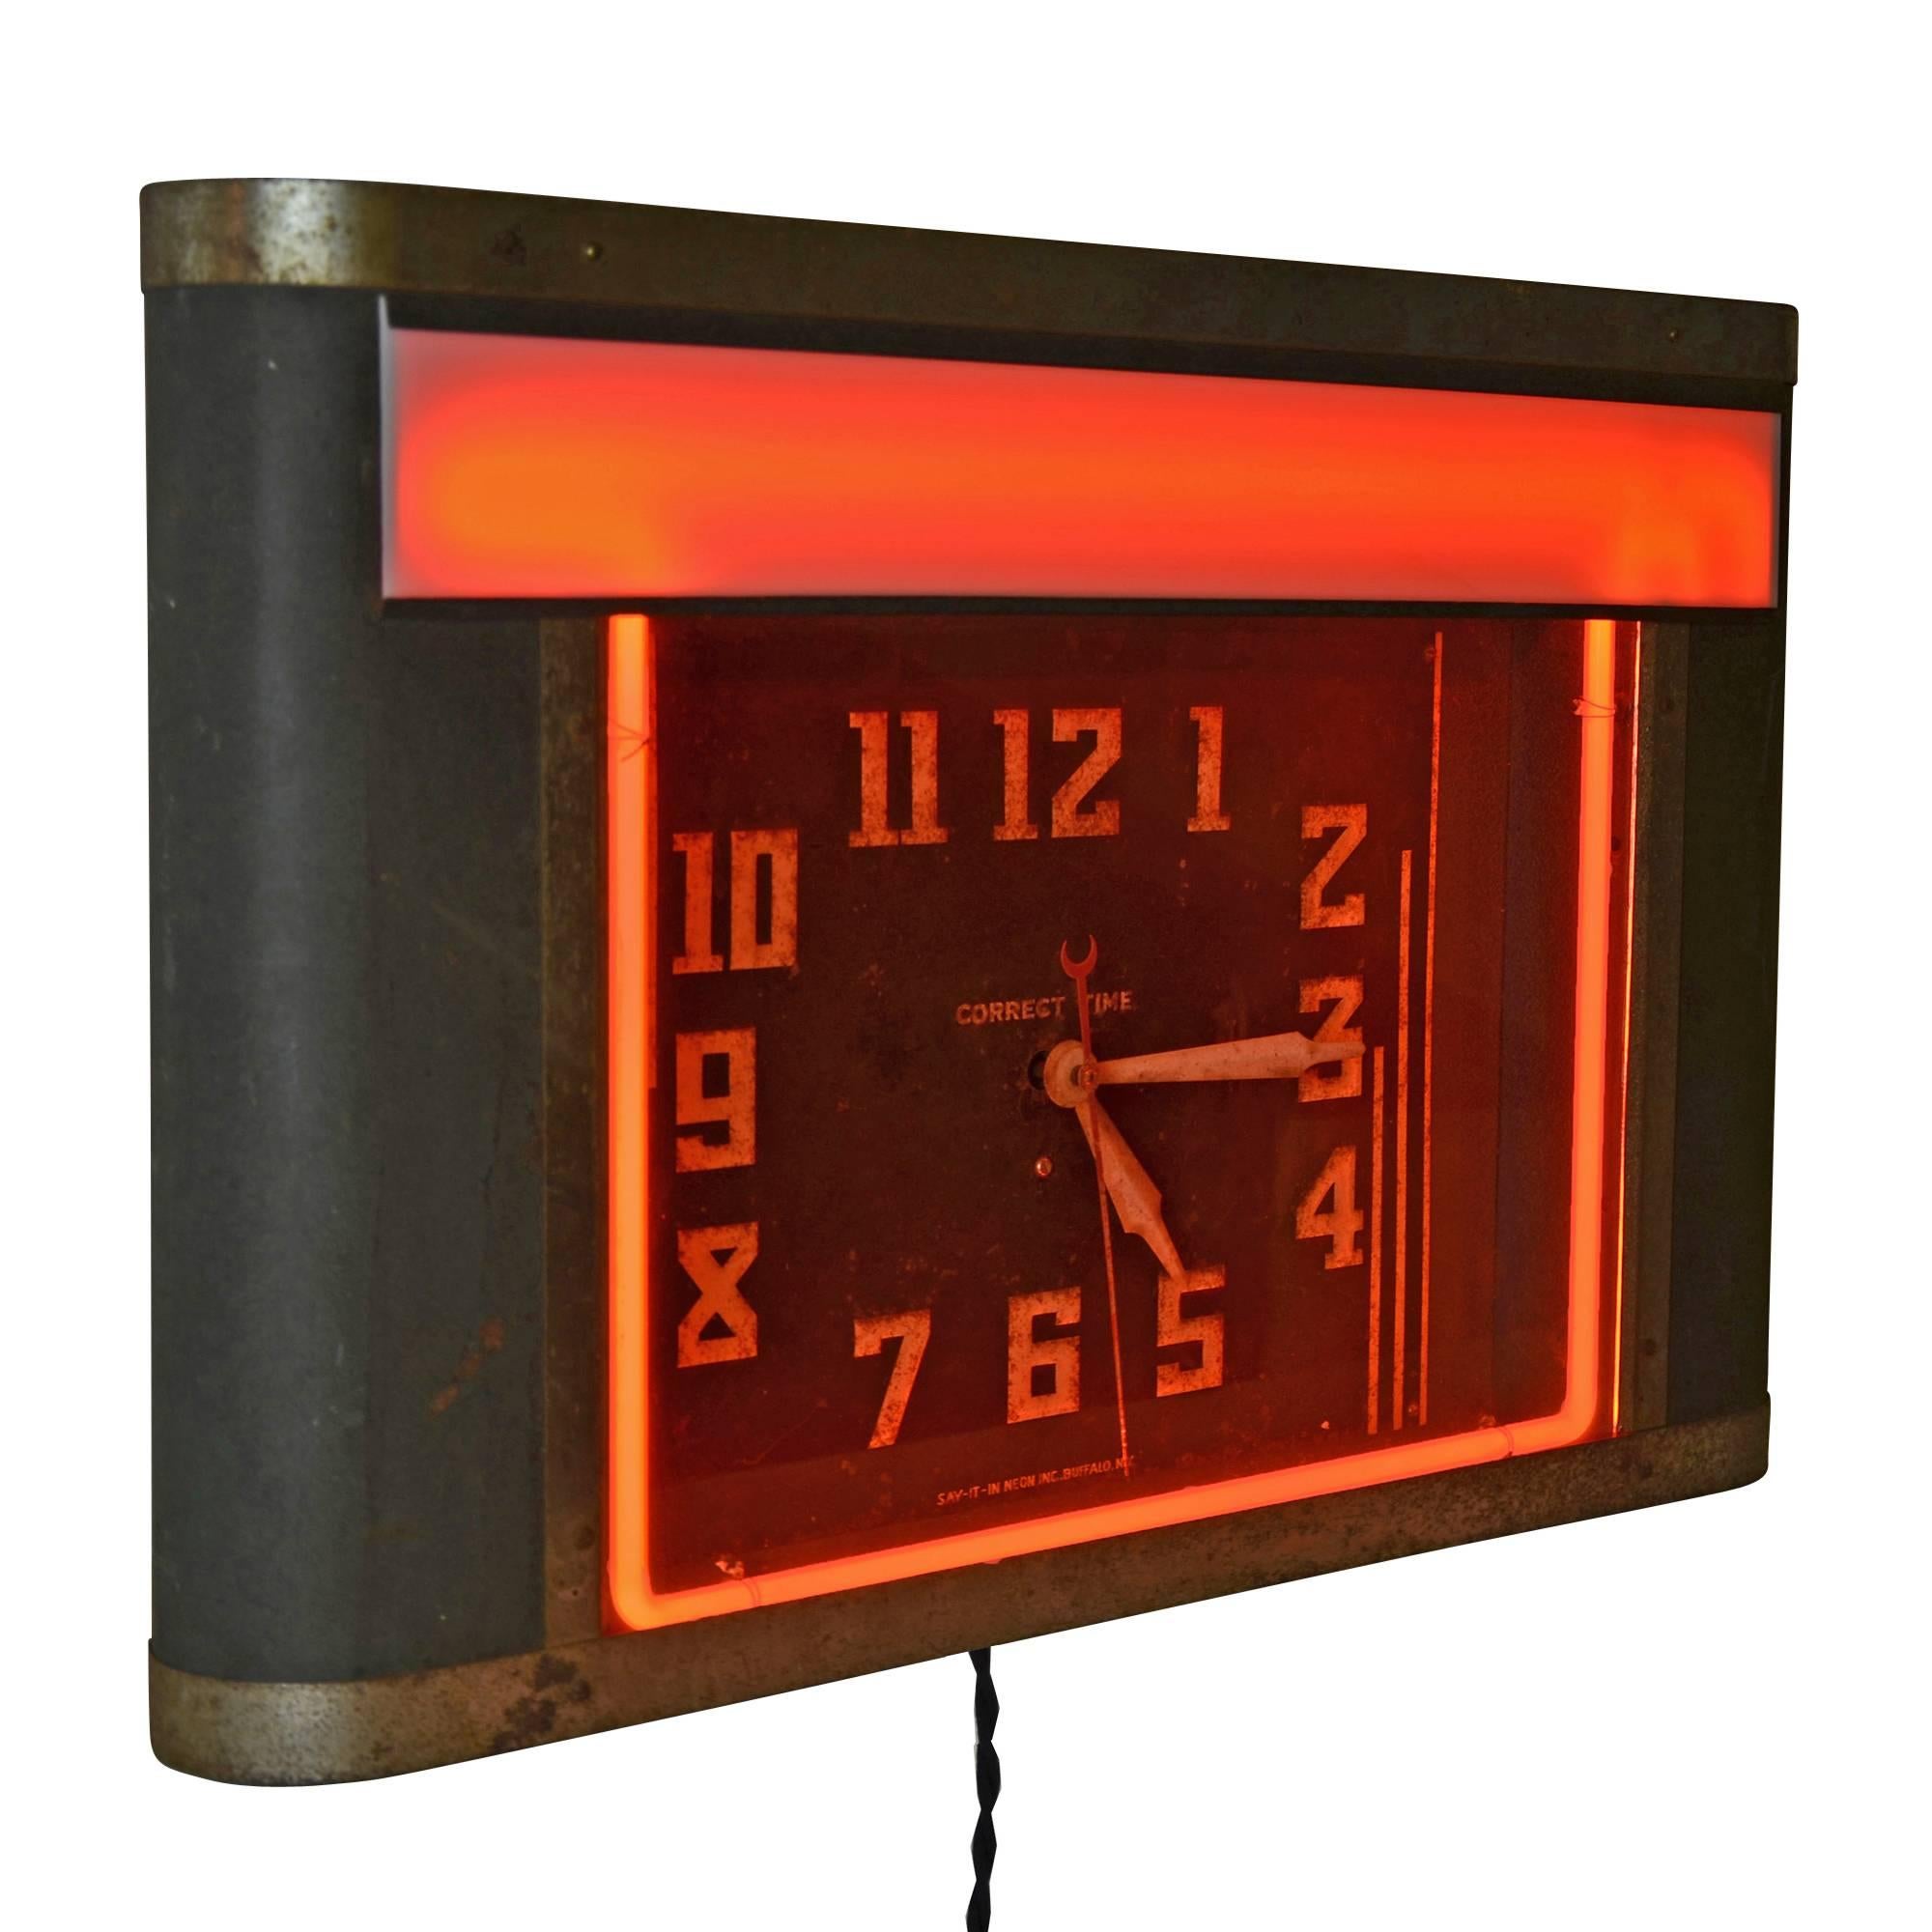 This impressive neon clock by Say-It-In-Neon sports one of our favourite combinations: perfectly worn finish and perfectly restored functionality. Our team of experts took careful pride in restoring the neon and time-keeping mechanisms, making sure